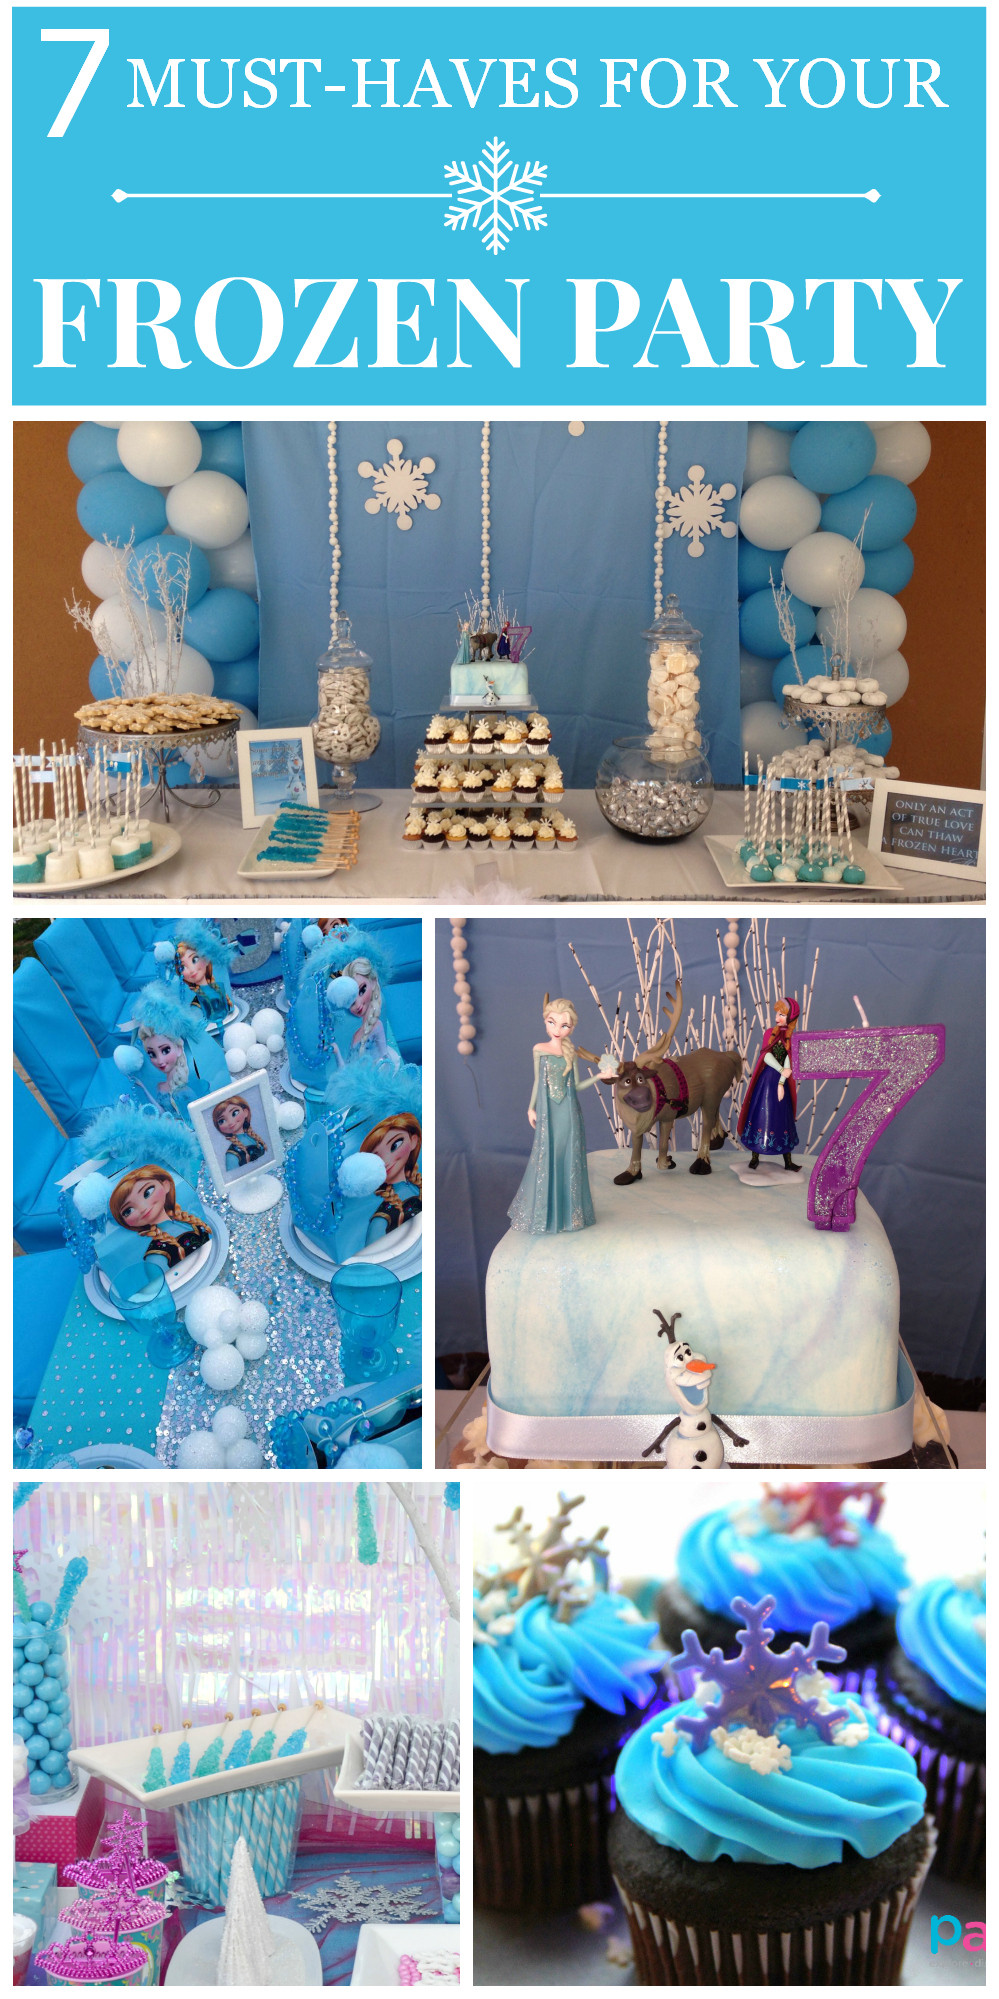 Frozen Birthday Decoration Ideas
 7 Things You Must Have at Your Frozen Party